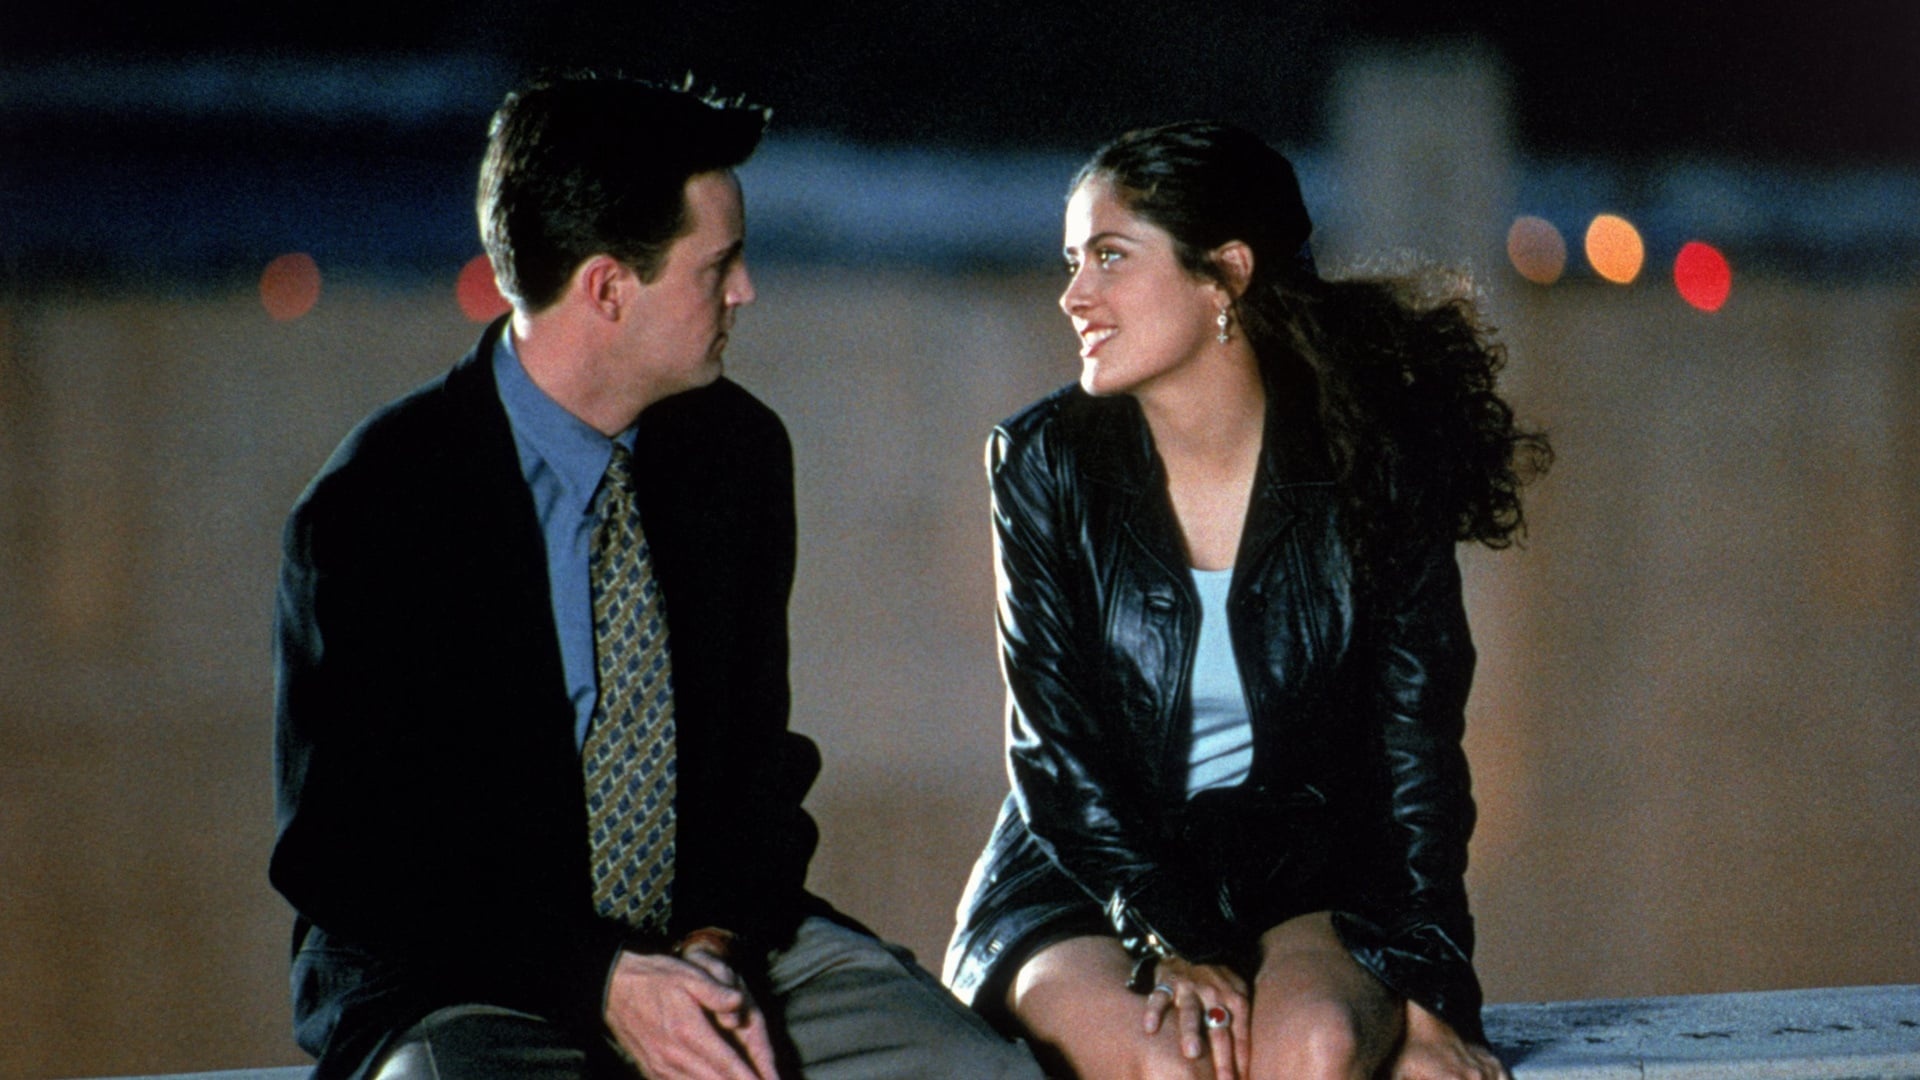 Fools Rush In (Movie): Matthew Perry and Salma Hayek as the leading characters of a romantic comedy film. 1920x1080 Full HD Background.